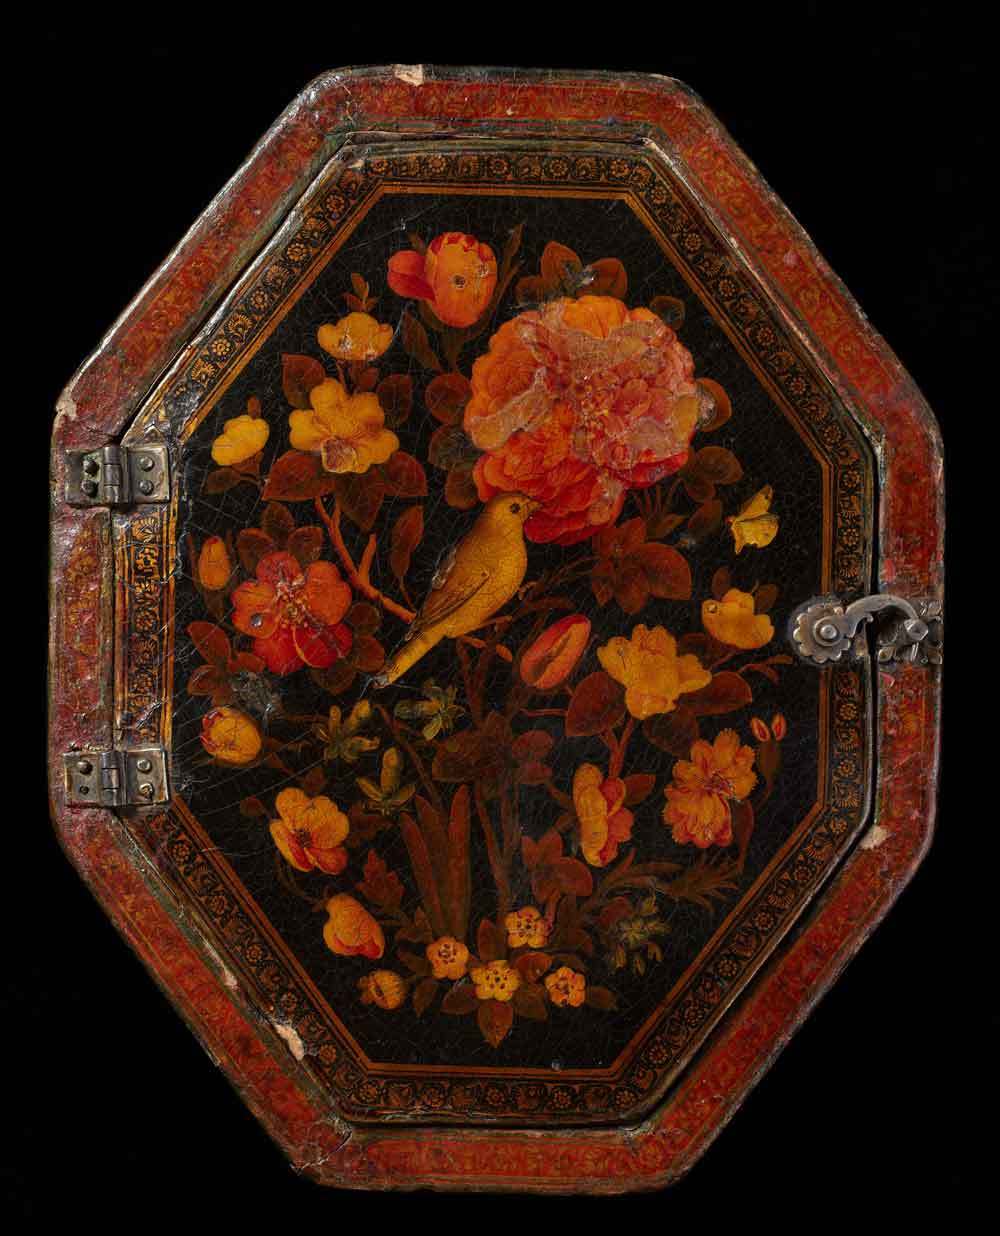 Lacquer mirror with rose and nightingale, Iran; 18th century A common motif in poetry through-out the Islamic world, one that was also very popular in visual art from the 17th to the 19th century, is the rose and the nightingale – gol o bolbol. The rose stands for sublime feminine beauty; the nightingale symbolizes the male admirer. Together they are a symbol of love and at times a metaphor of the impossible or unattainable love. The Great Mughal Akbar wrote the following verse: “It is not dewdrops that fall on the rose / They are only tears from the nightingales.” The rendition of the bashful nightingale and the luxuriant flora with roses, branches of common St. John’s wort, and other plants both come from a time when naturalistic models from Europe influenced Persian painting.